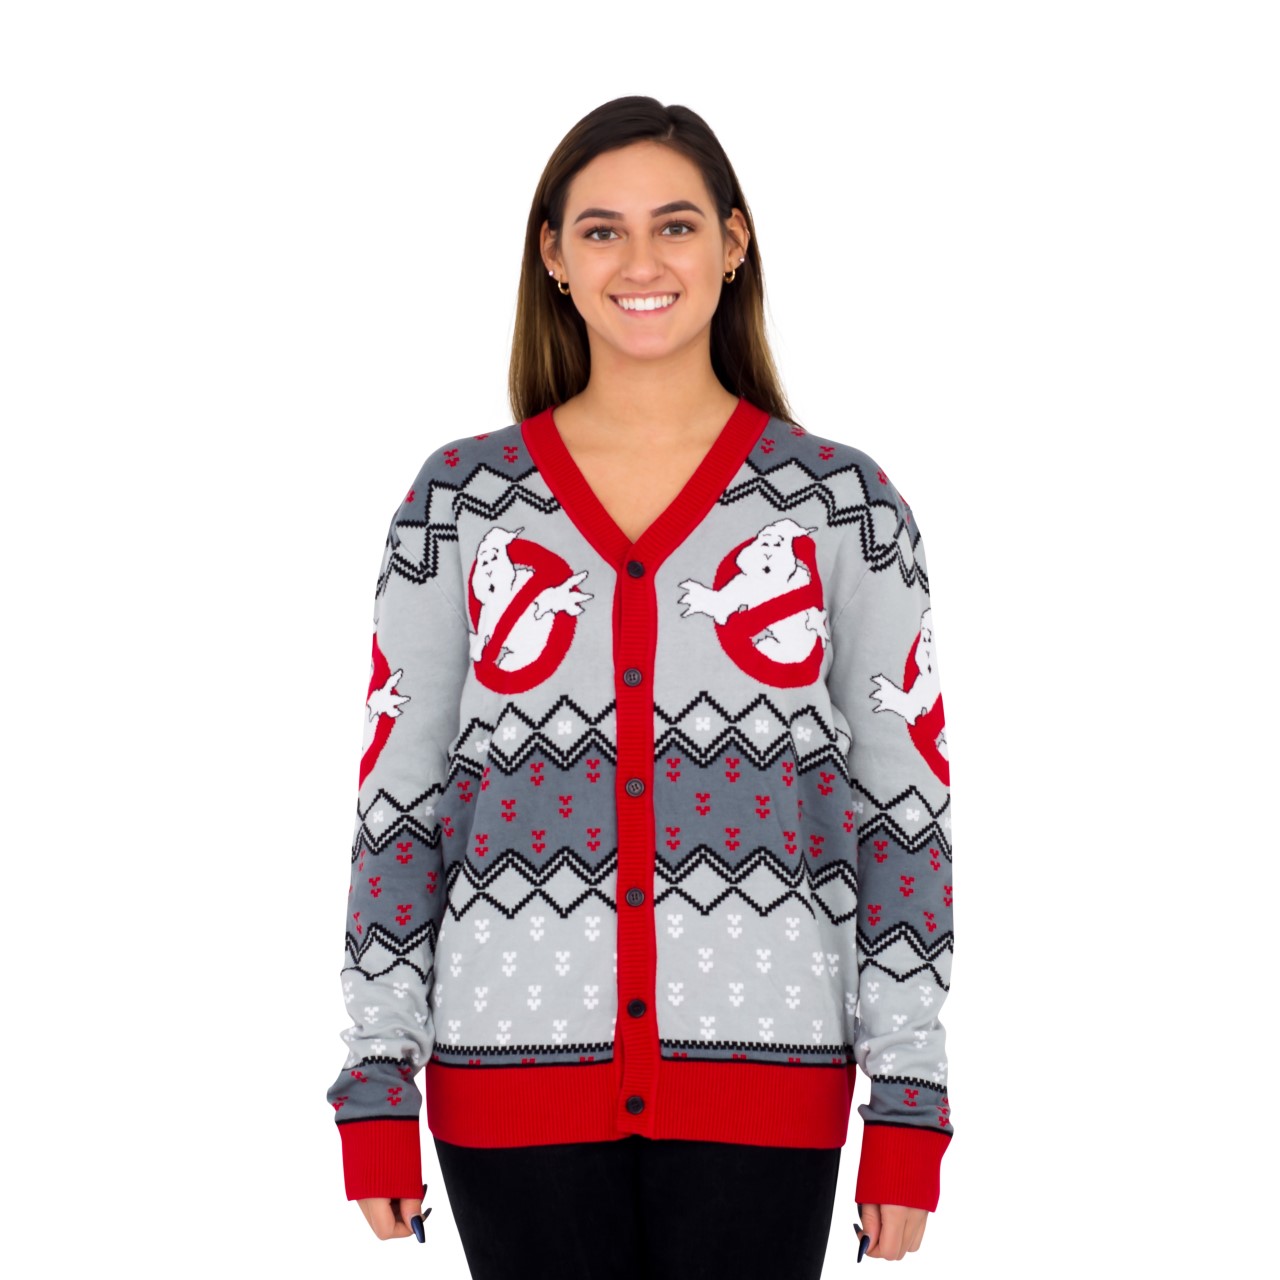 Women’s Ghostbusters Logo Ugly Christmas Cardigan Sweater,New Products : uglyschristmassweater.com